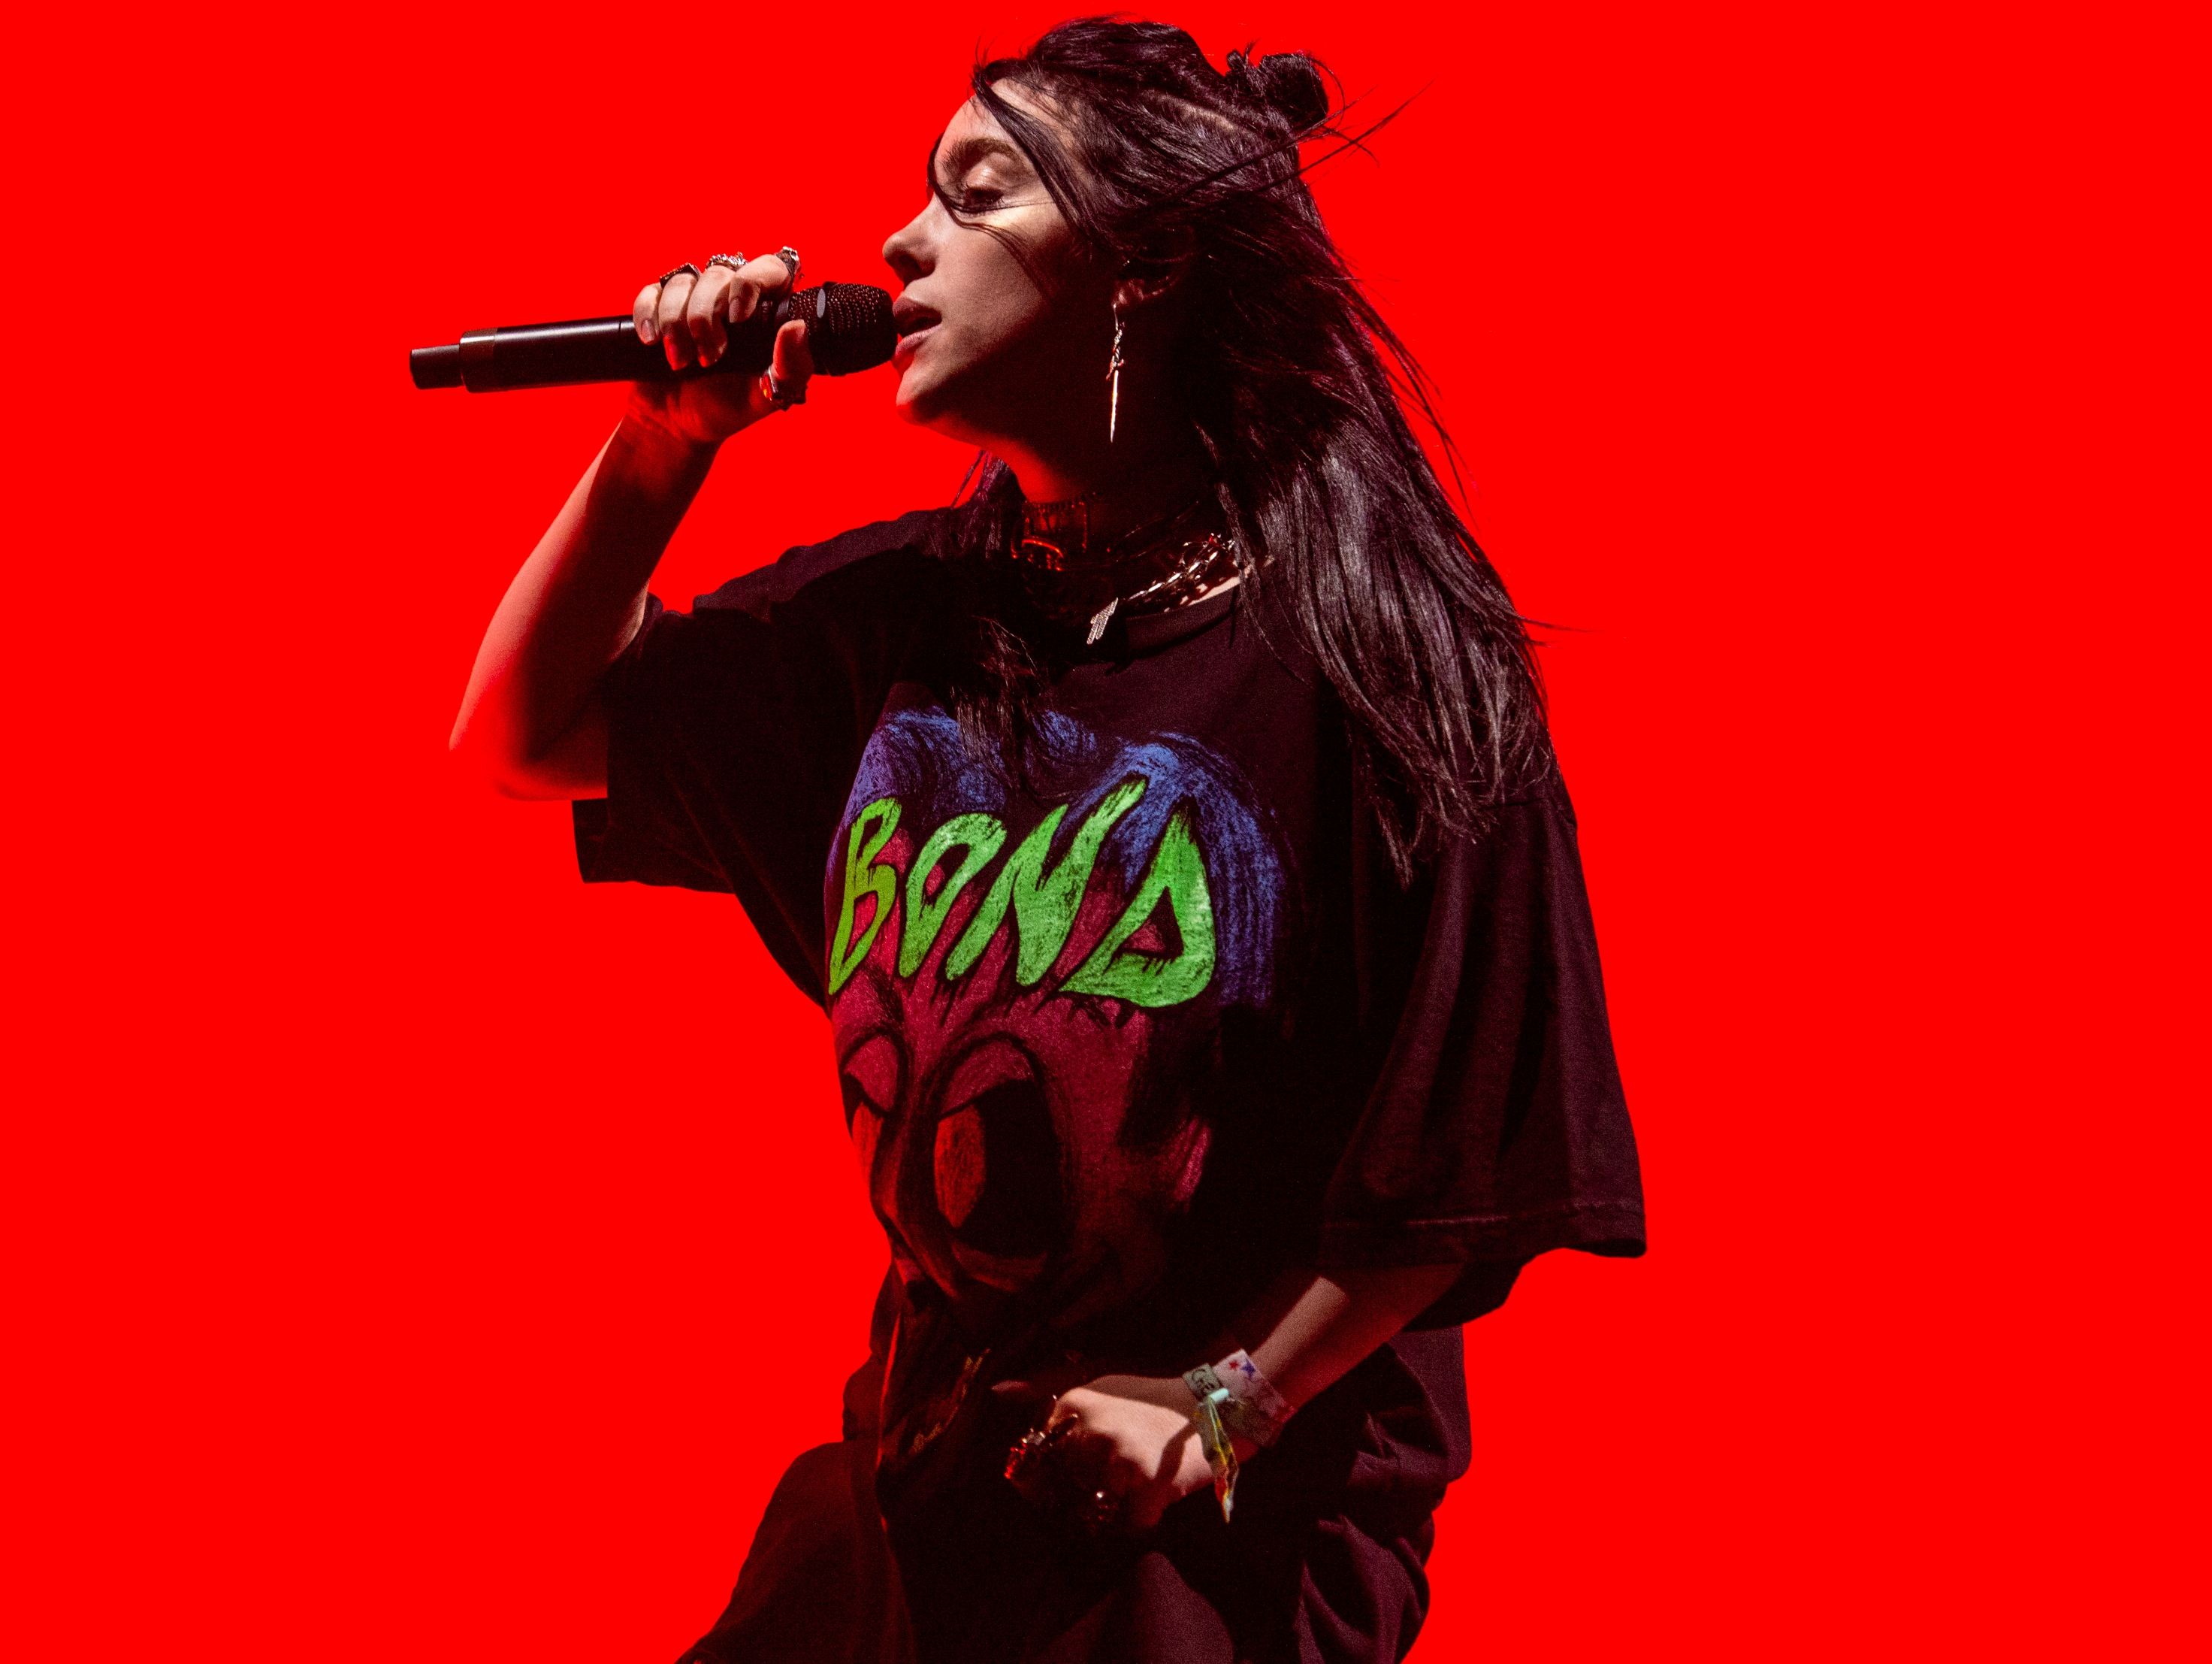 Billie Eilish performing with a red background at Coachella 2019